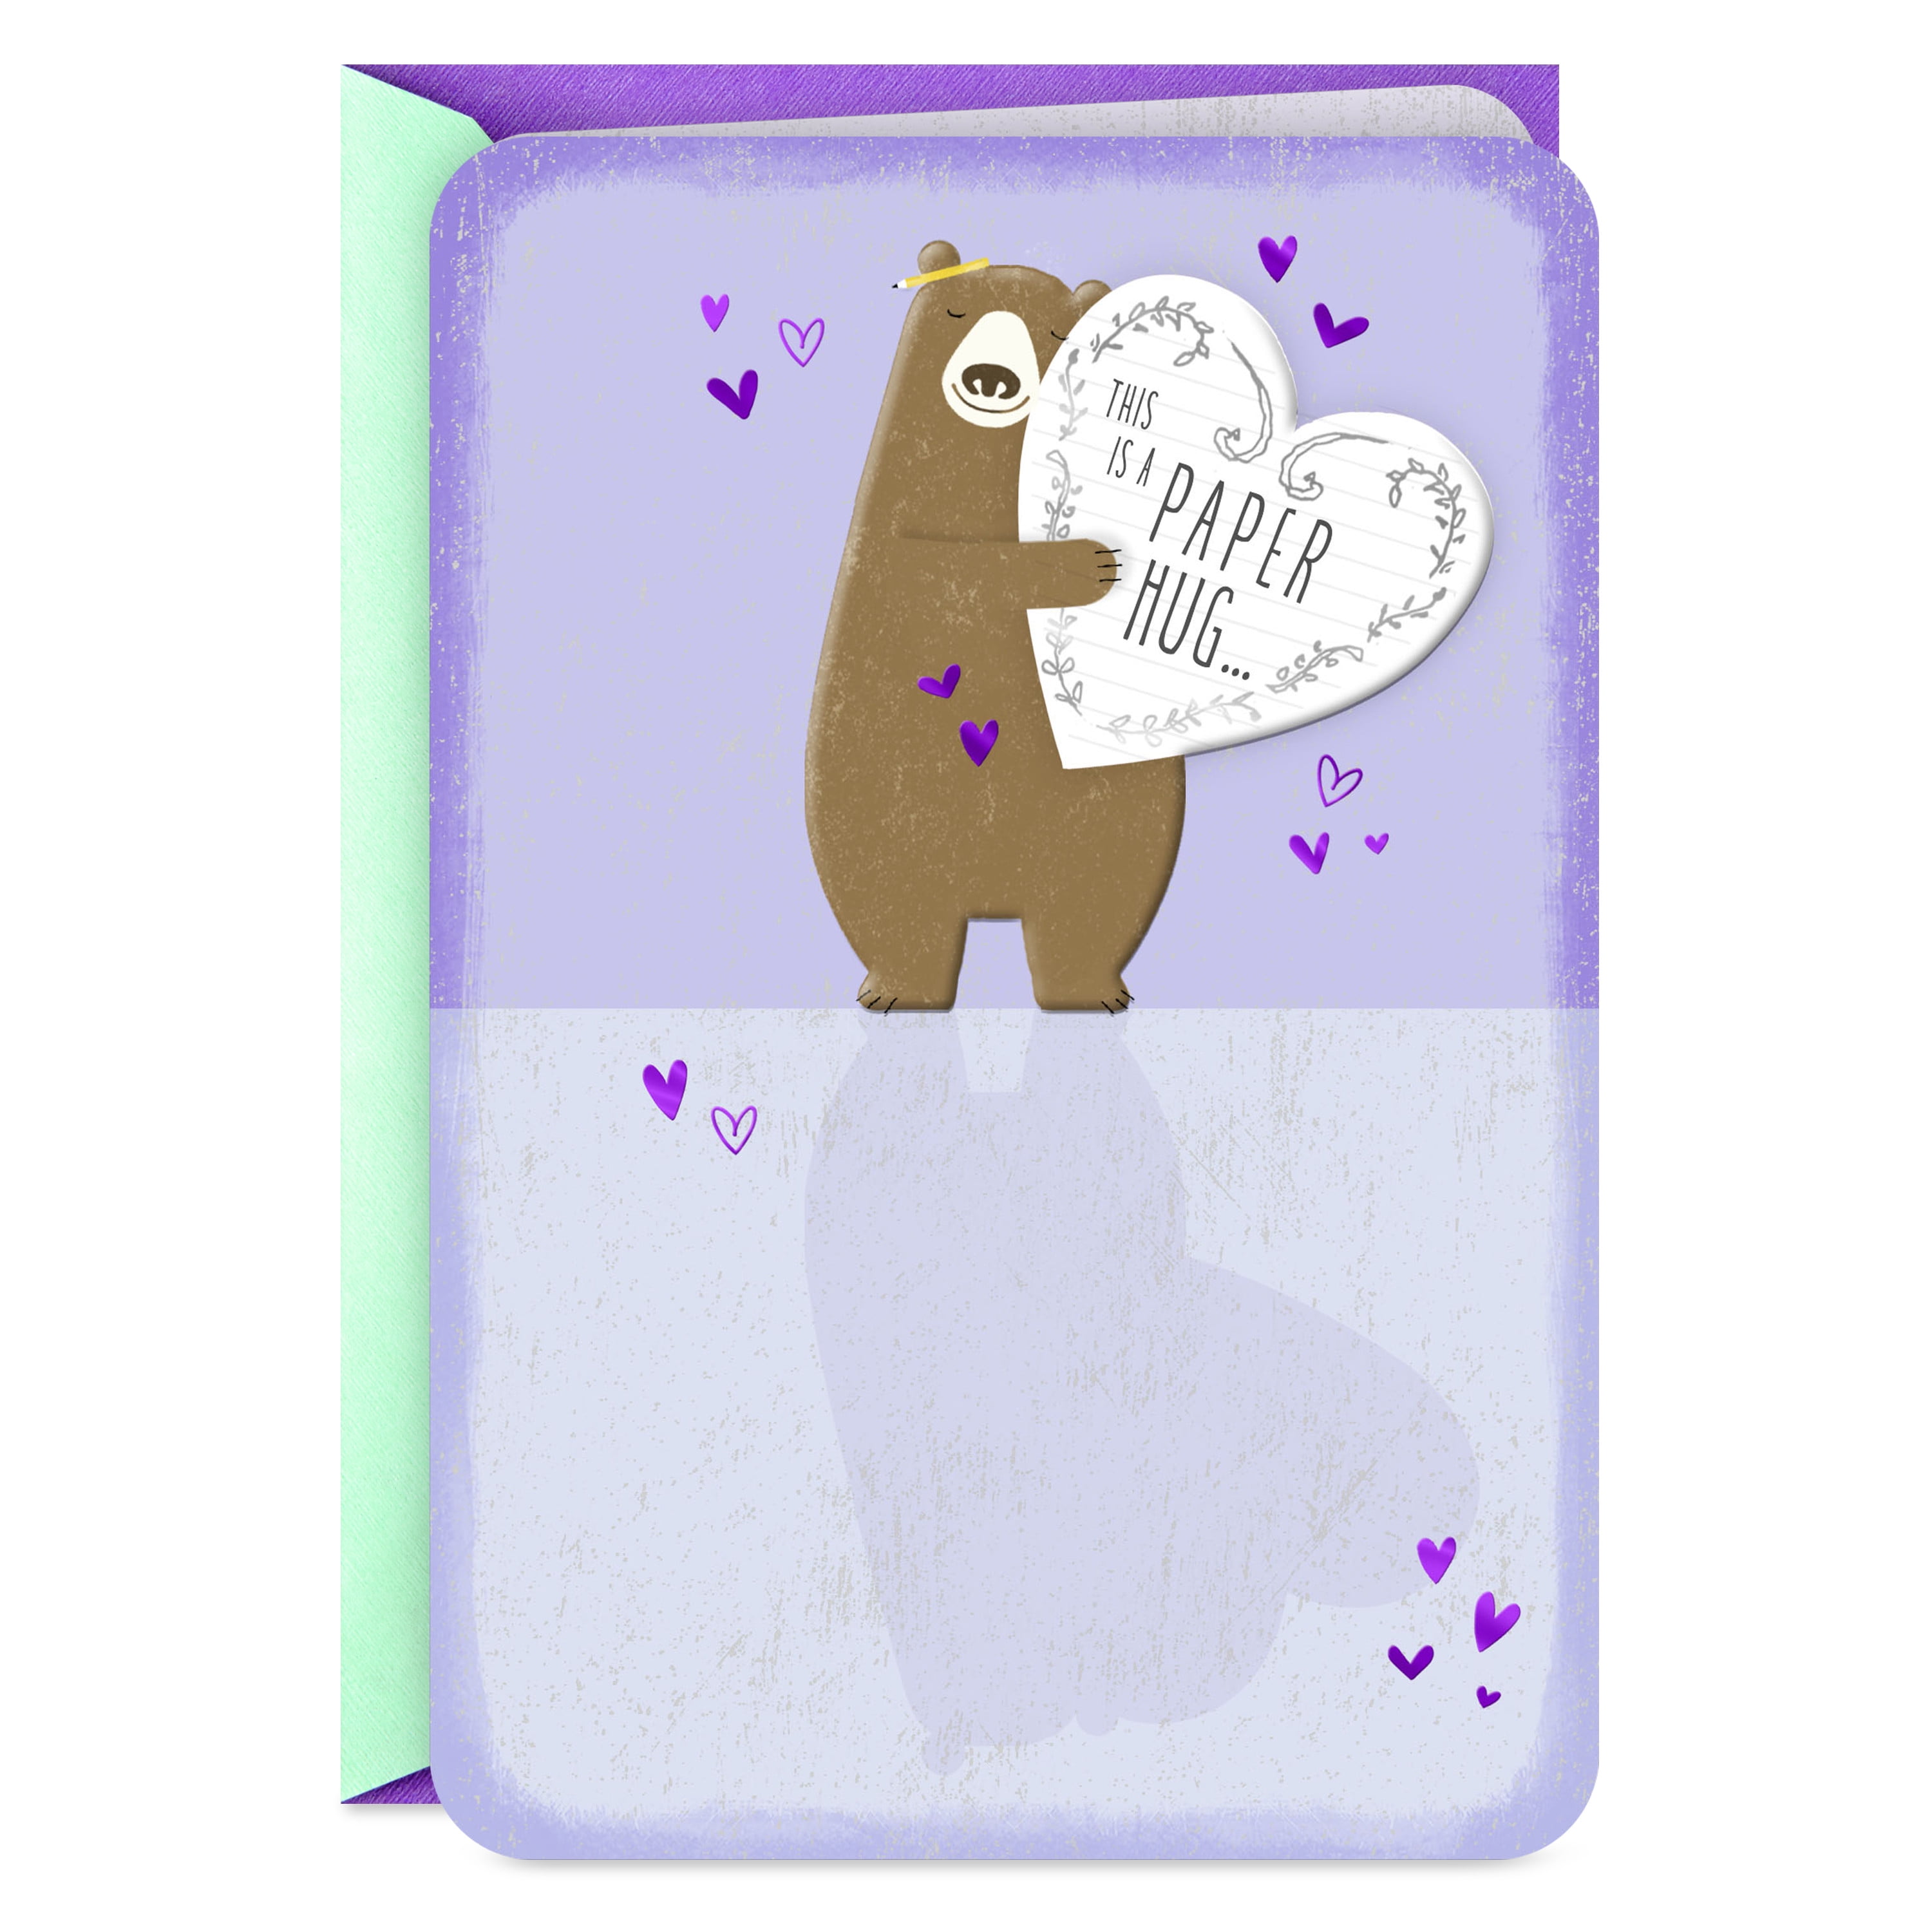 Write your own Hug Notelets Flat 8 x Thank You Cards With Envelopes